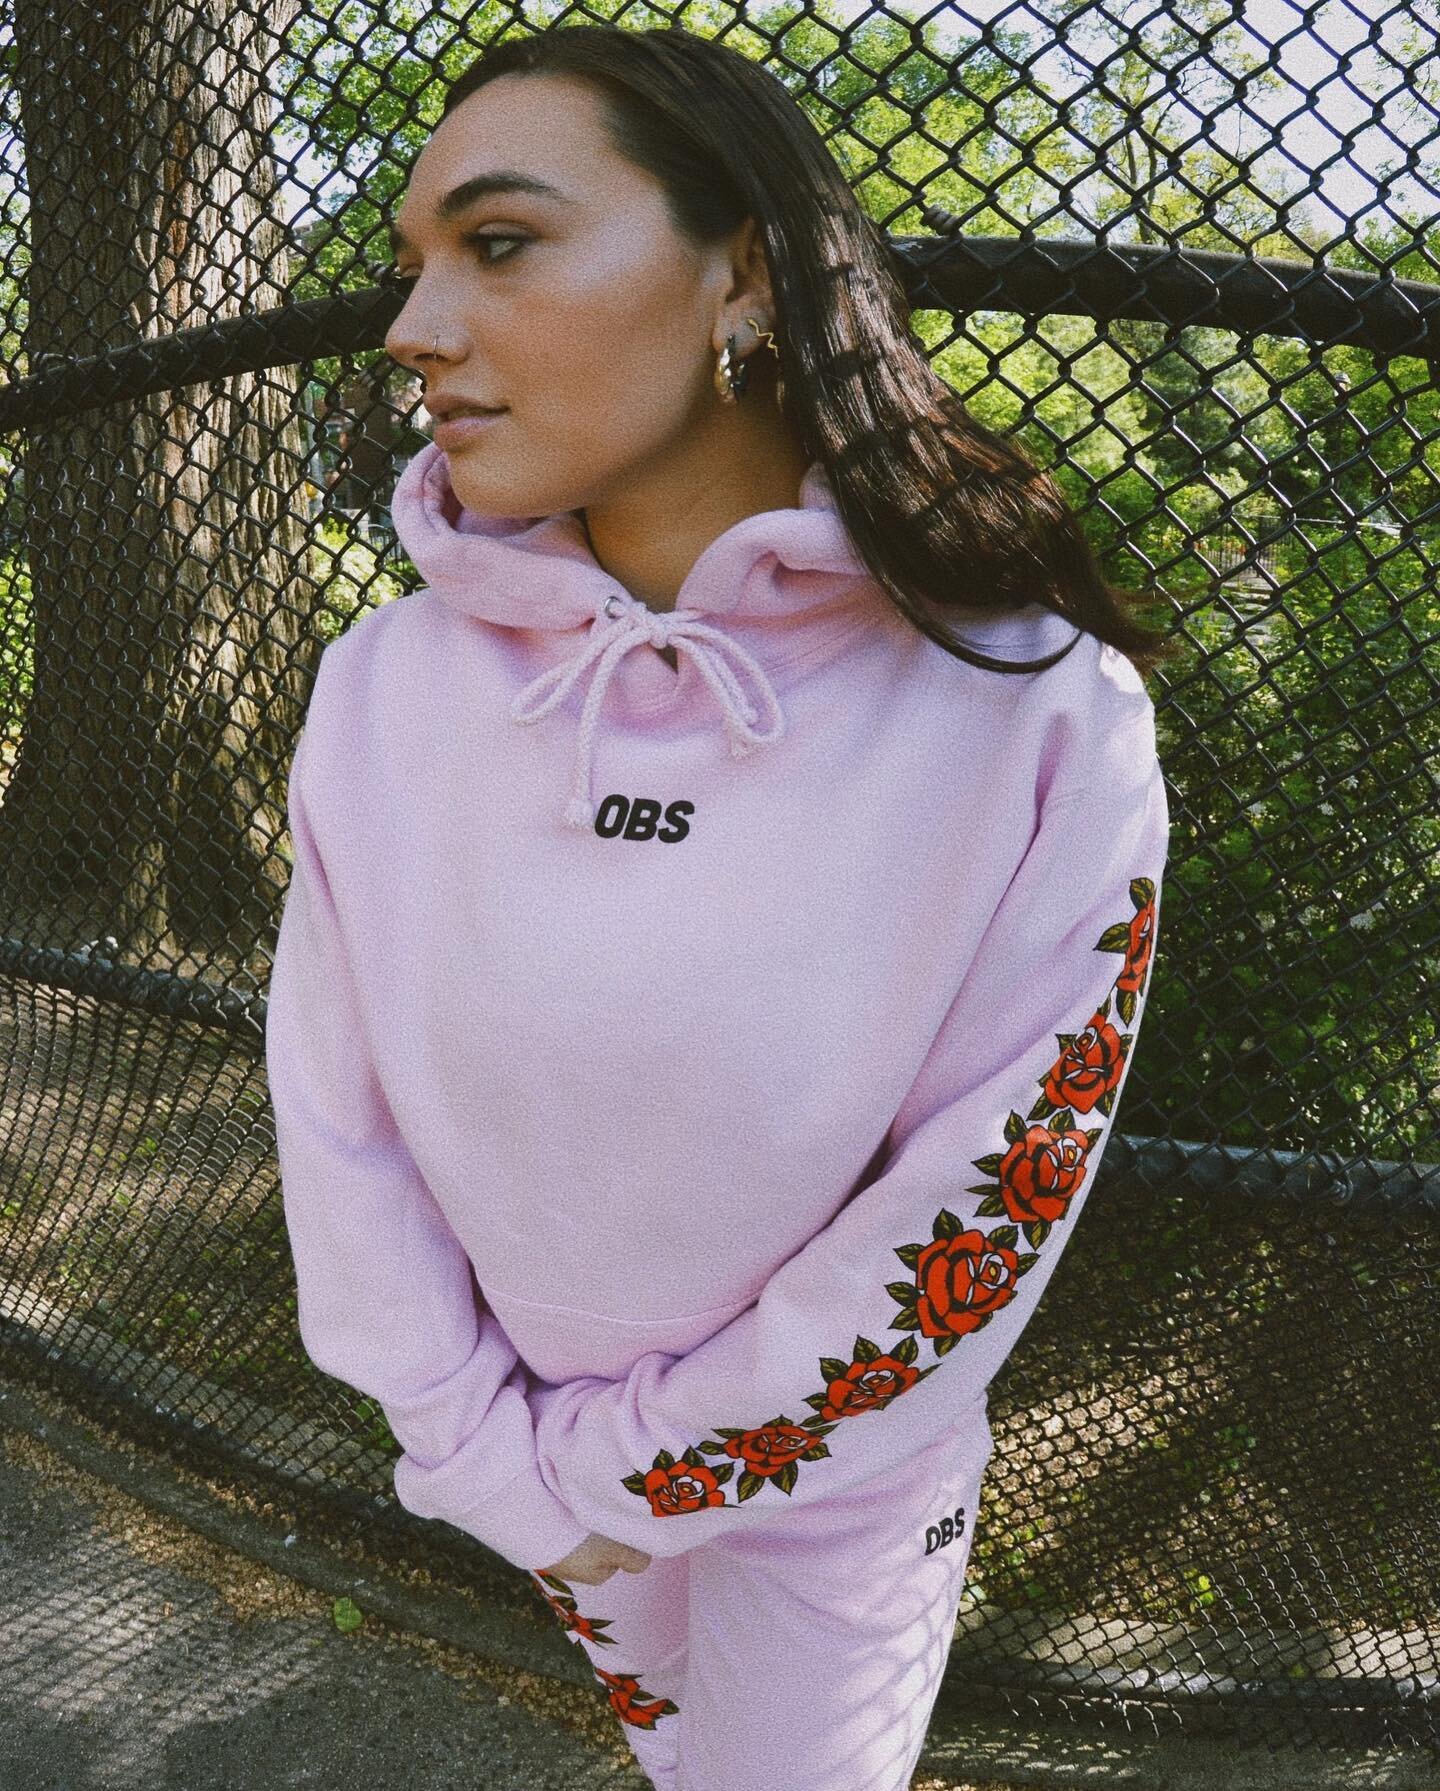 OBS SPRING/SUMMER launched yesterday along with our brand new website! Head over to see the new collections featuring this Rose &amp; Web pink sweatsuit modelled by @quinnjohansson 🌹🕸️ 📸 @jordn.scott